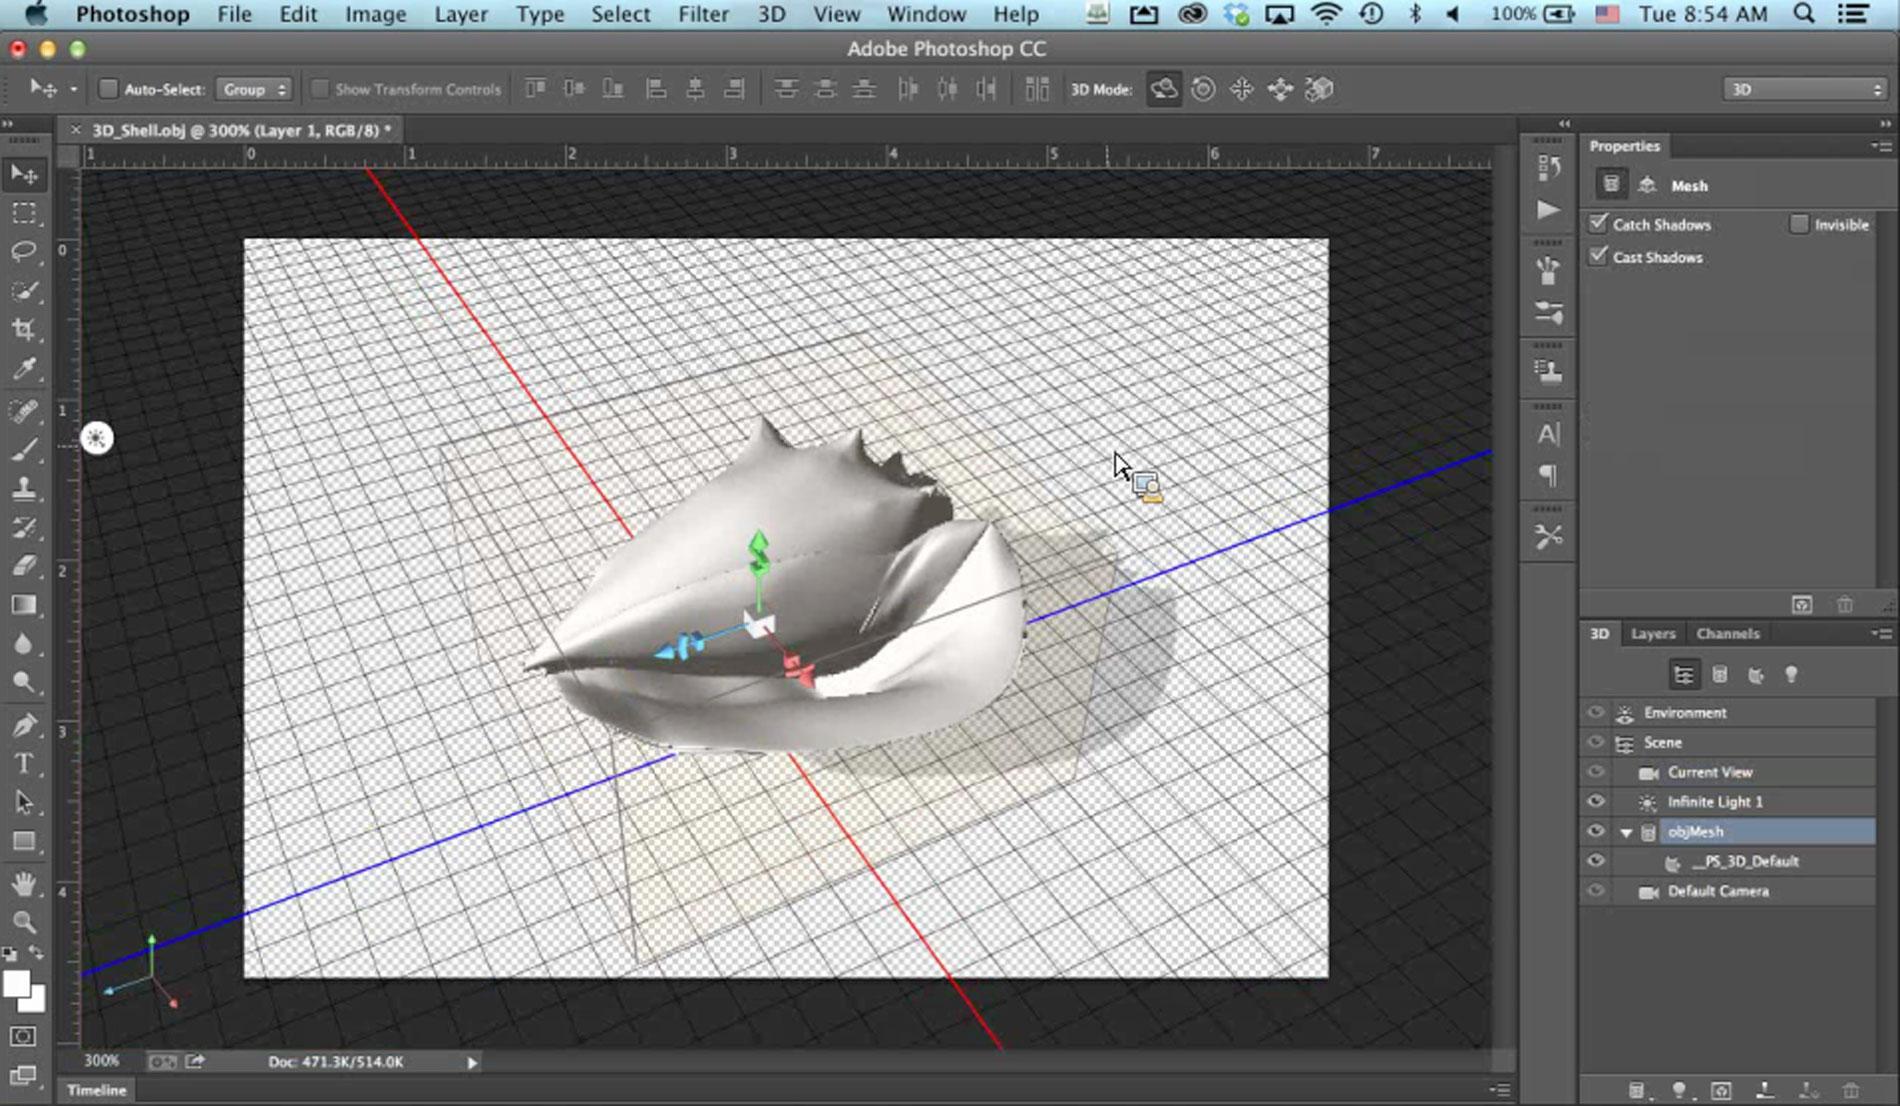 Adobe Adds New 3D Printing Features to CC With Update 2014.1